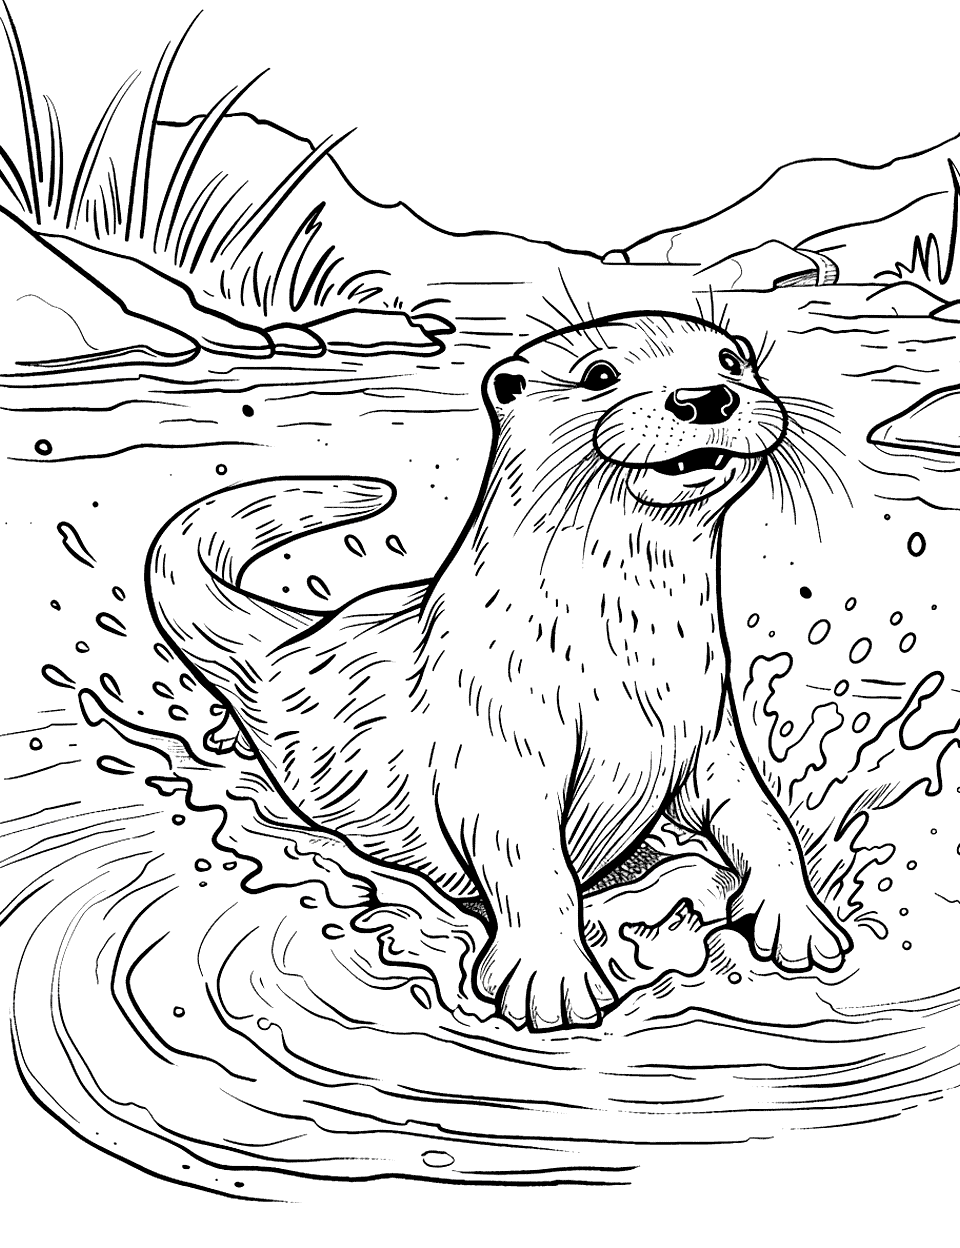 Otter Playing in Mud Coloring Page - A playful otter sliding in mud near a river, with mud splatters around.